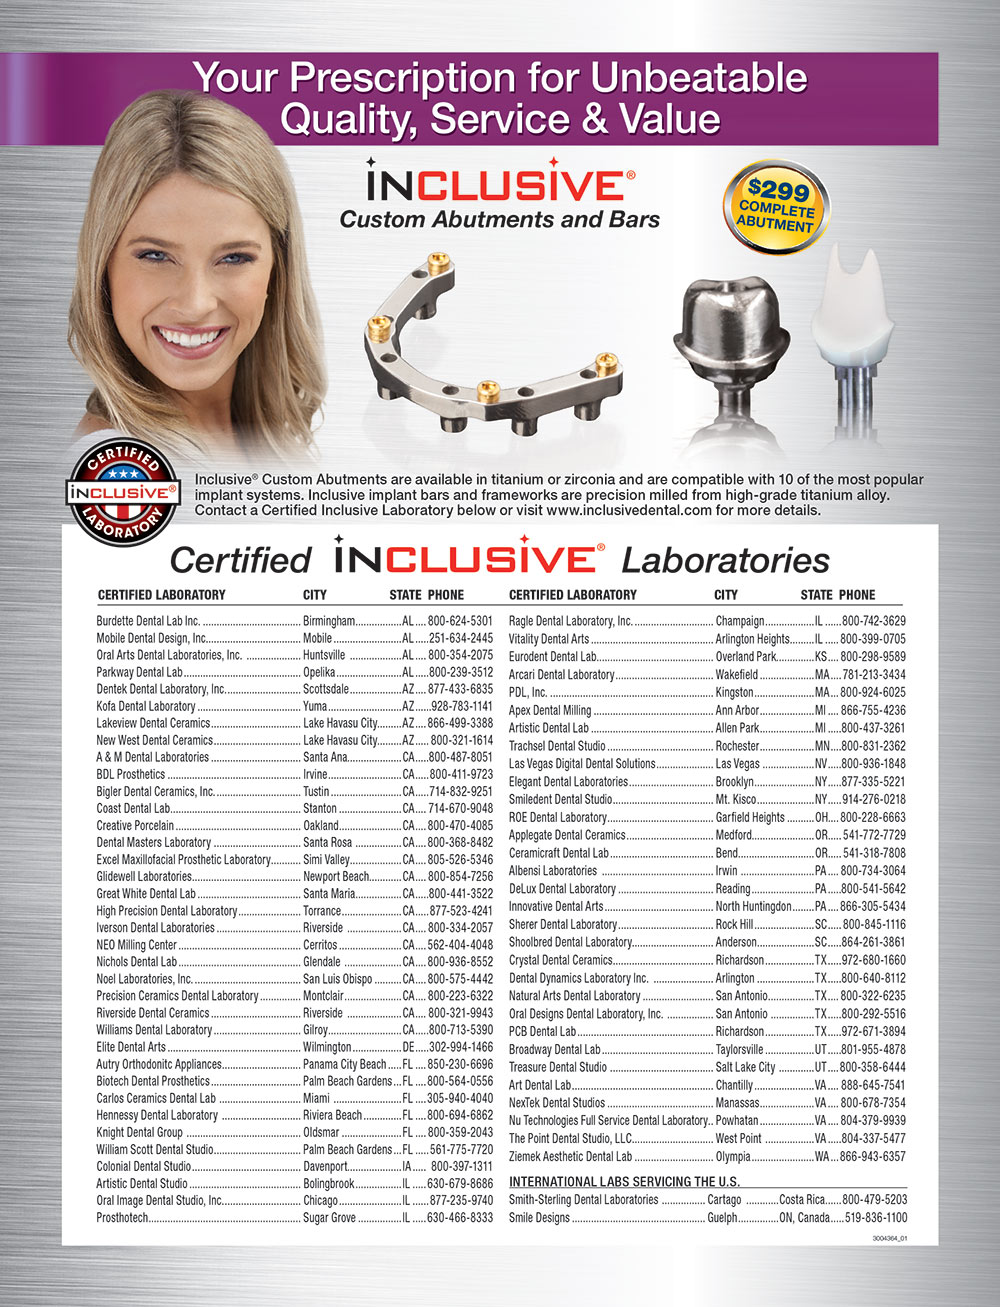 Number of dental labs offering Inclusive® Custom Abutments List